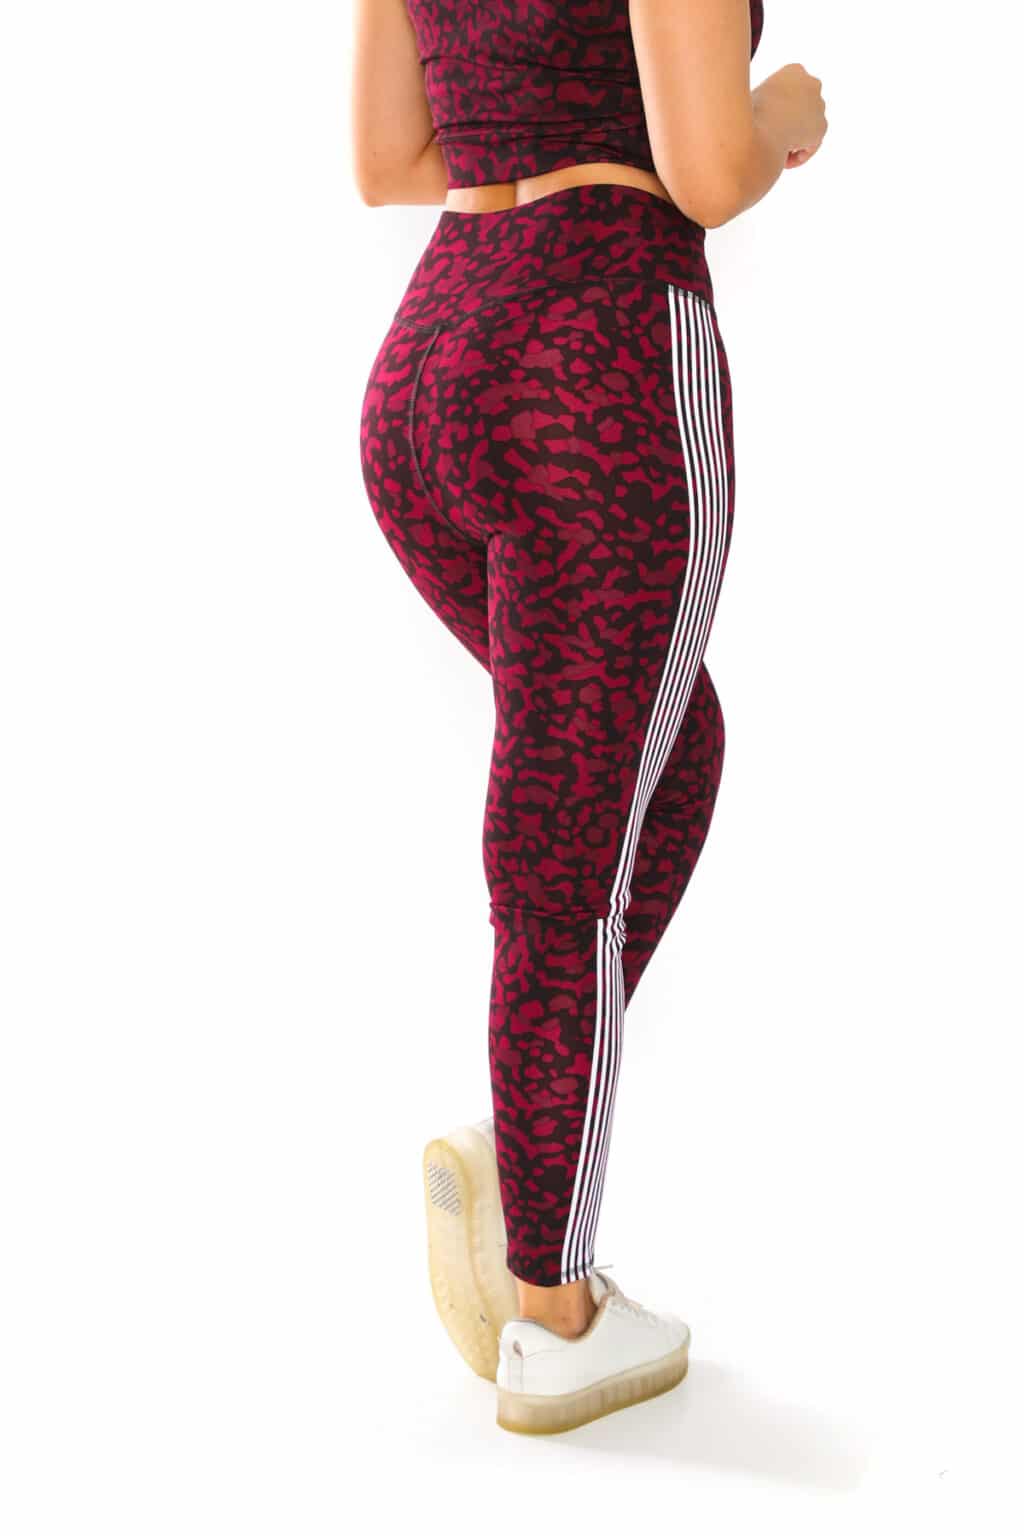 Activewear High Waisted Leopard Print Yoga Pants with White Color Side Stripes